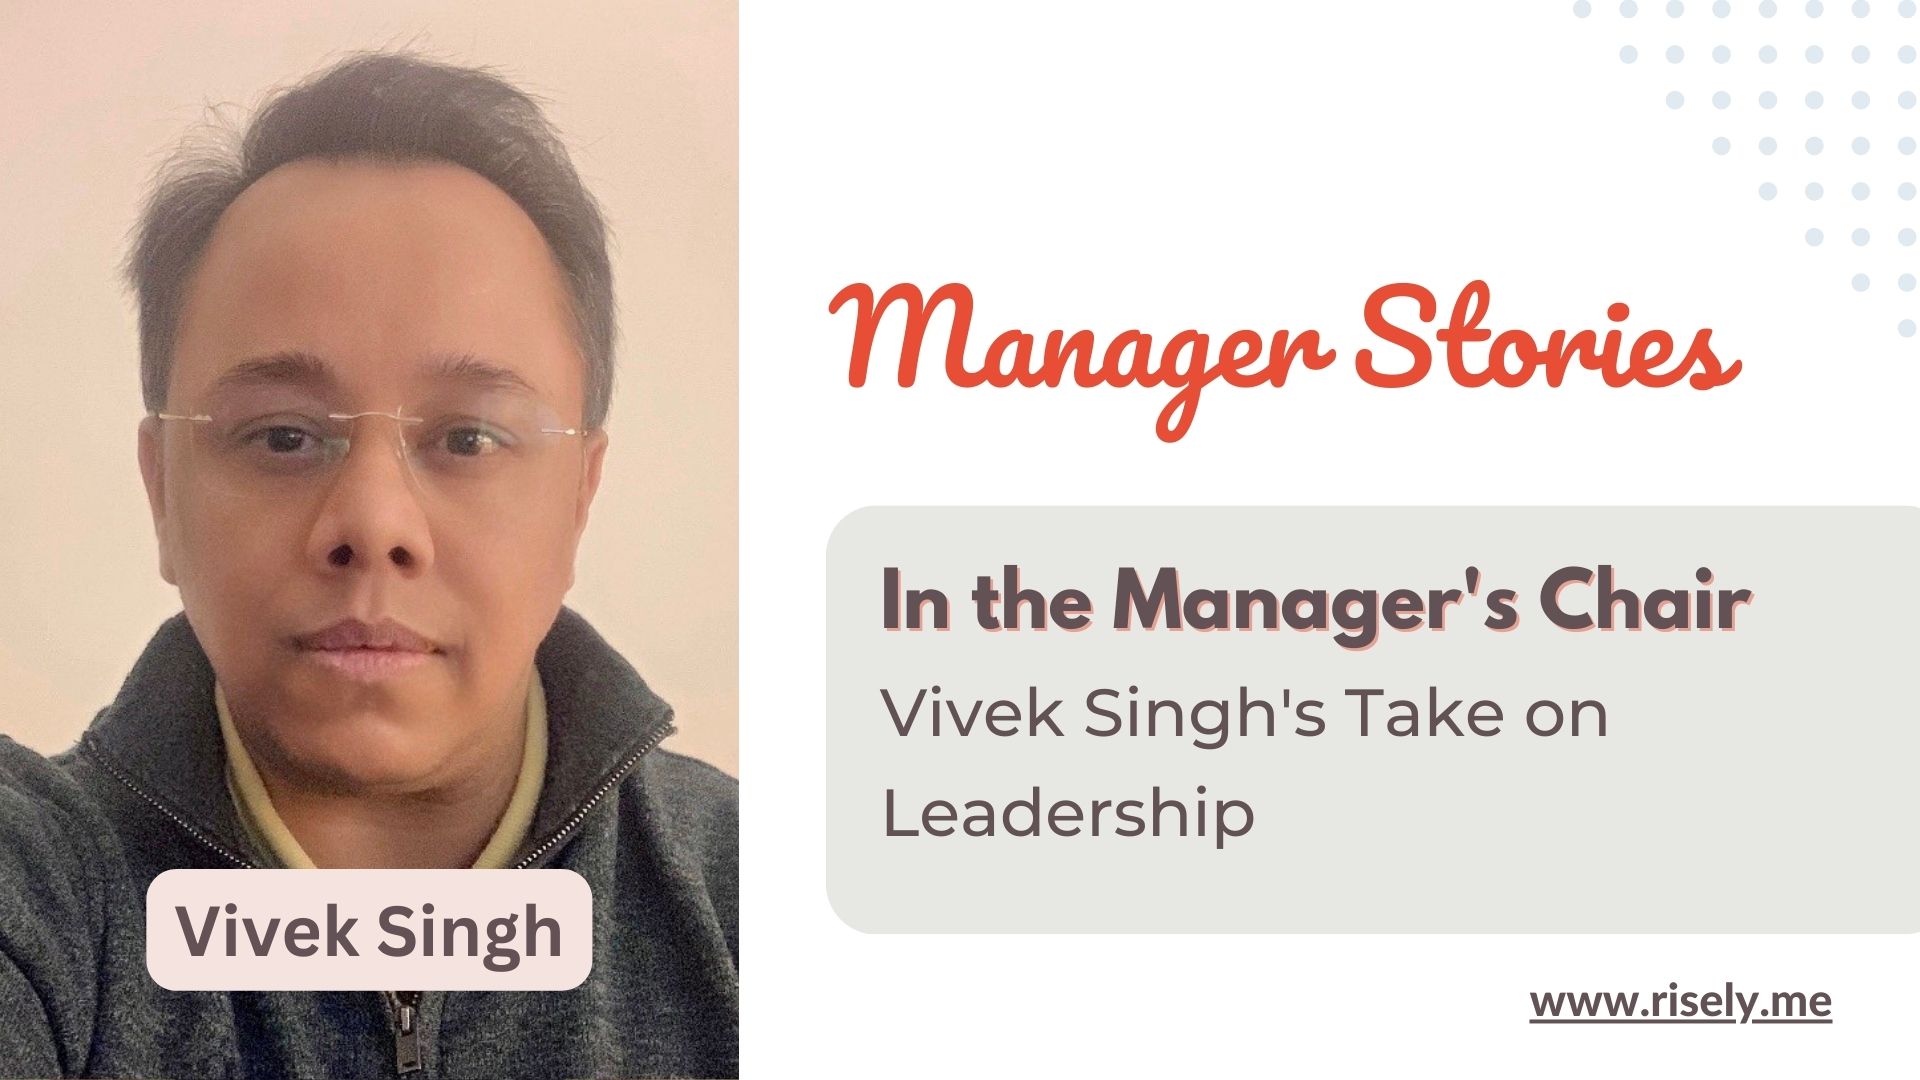 In the Manager's Chair: Vivek Singh's Take on Leadership